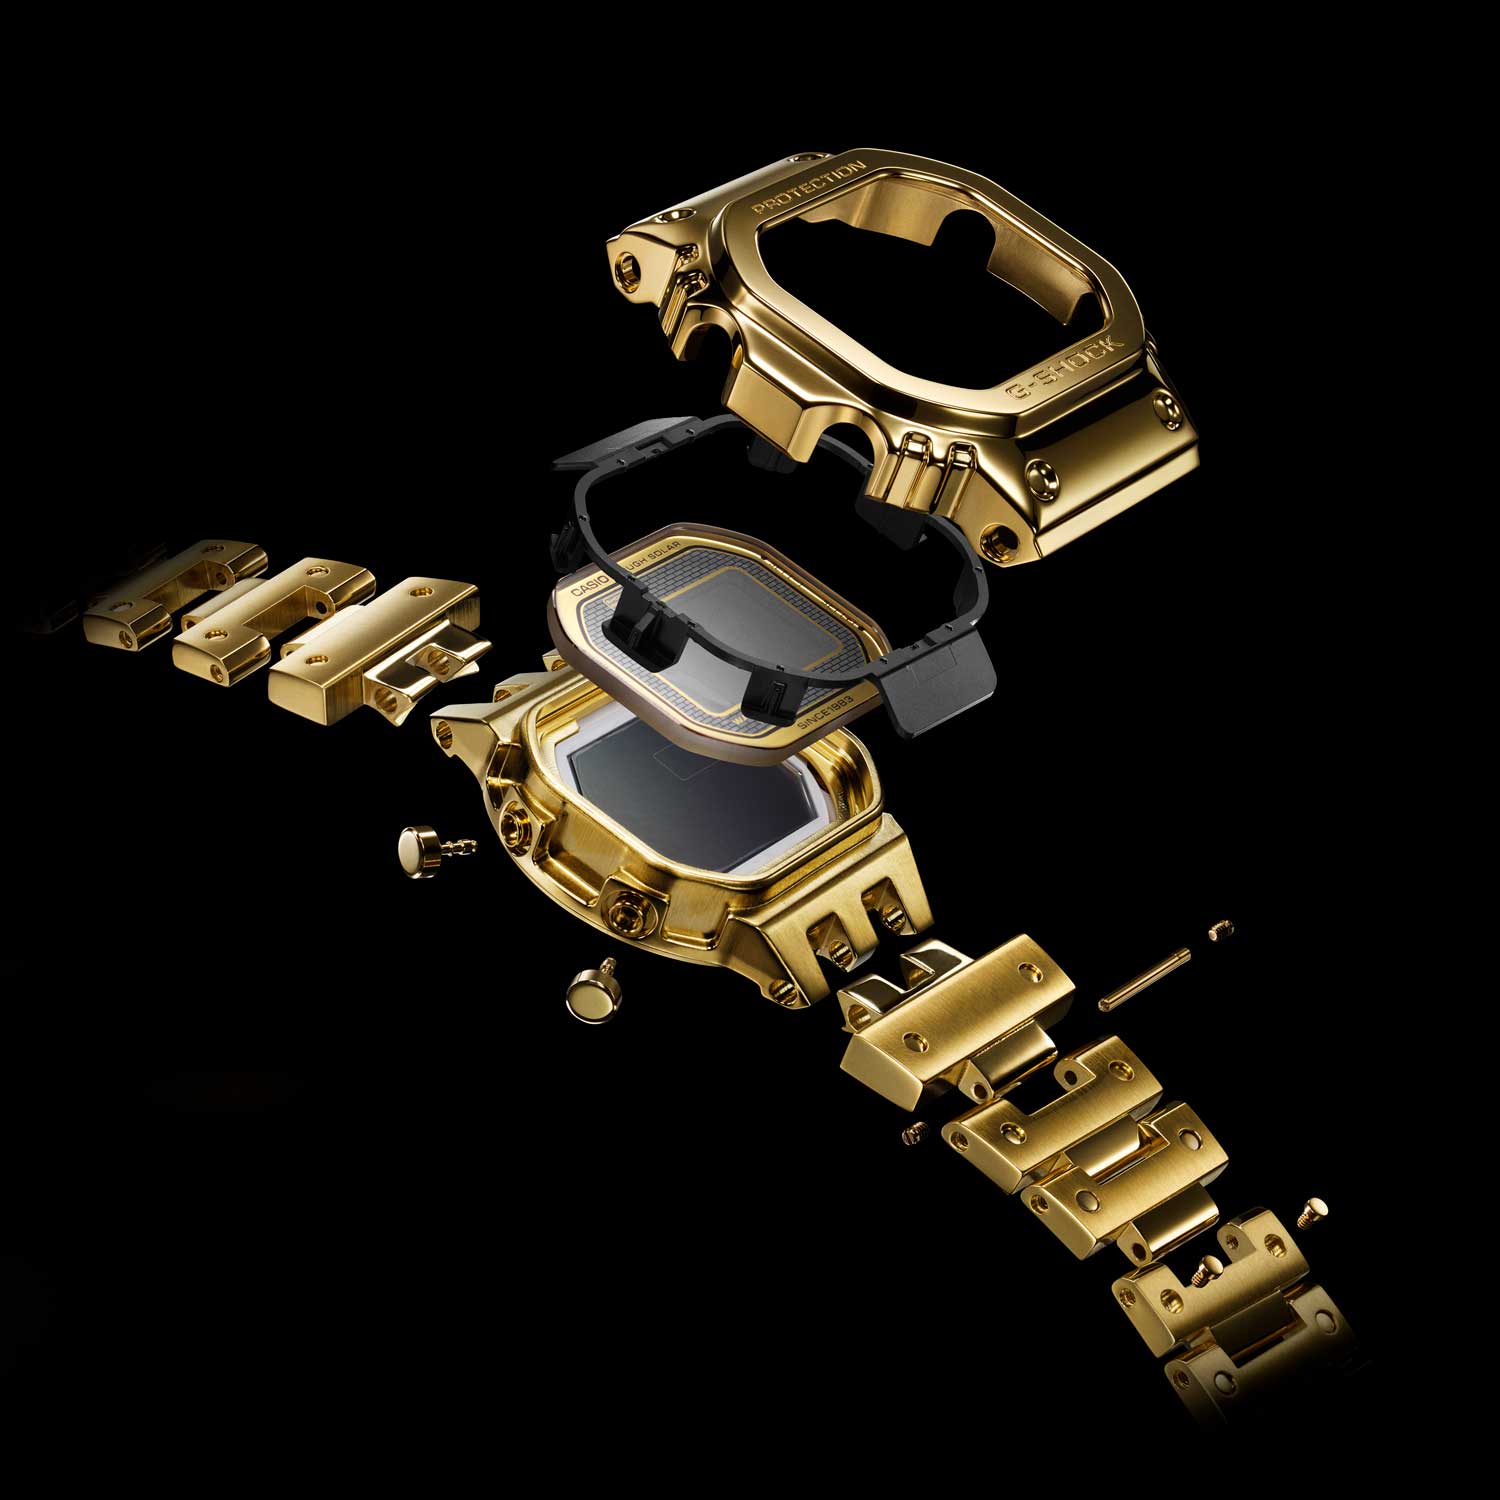 The G-D5000-9JR featured a case, bracelet, pushers, and even its screws, in 18K gold